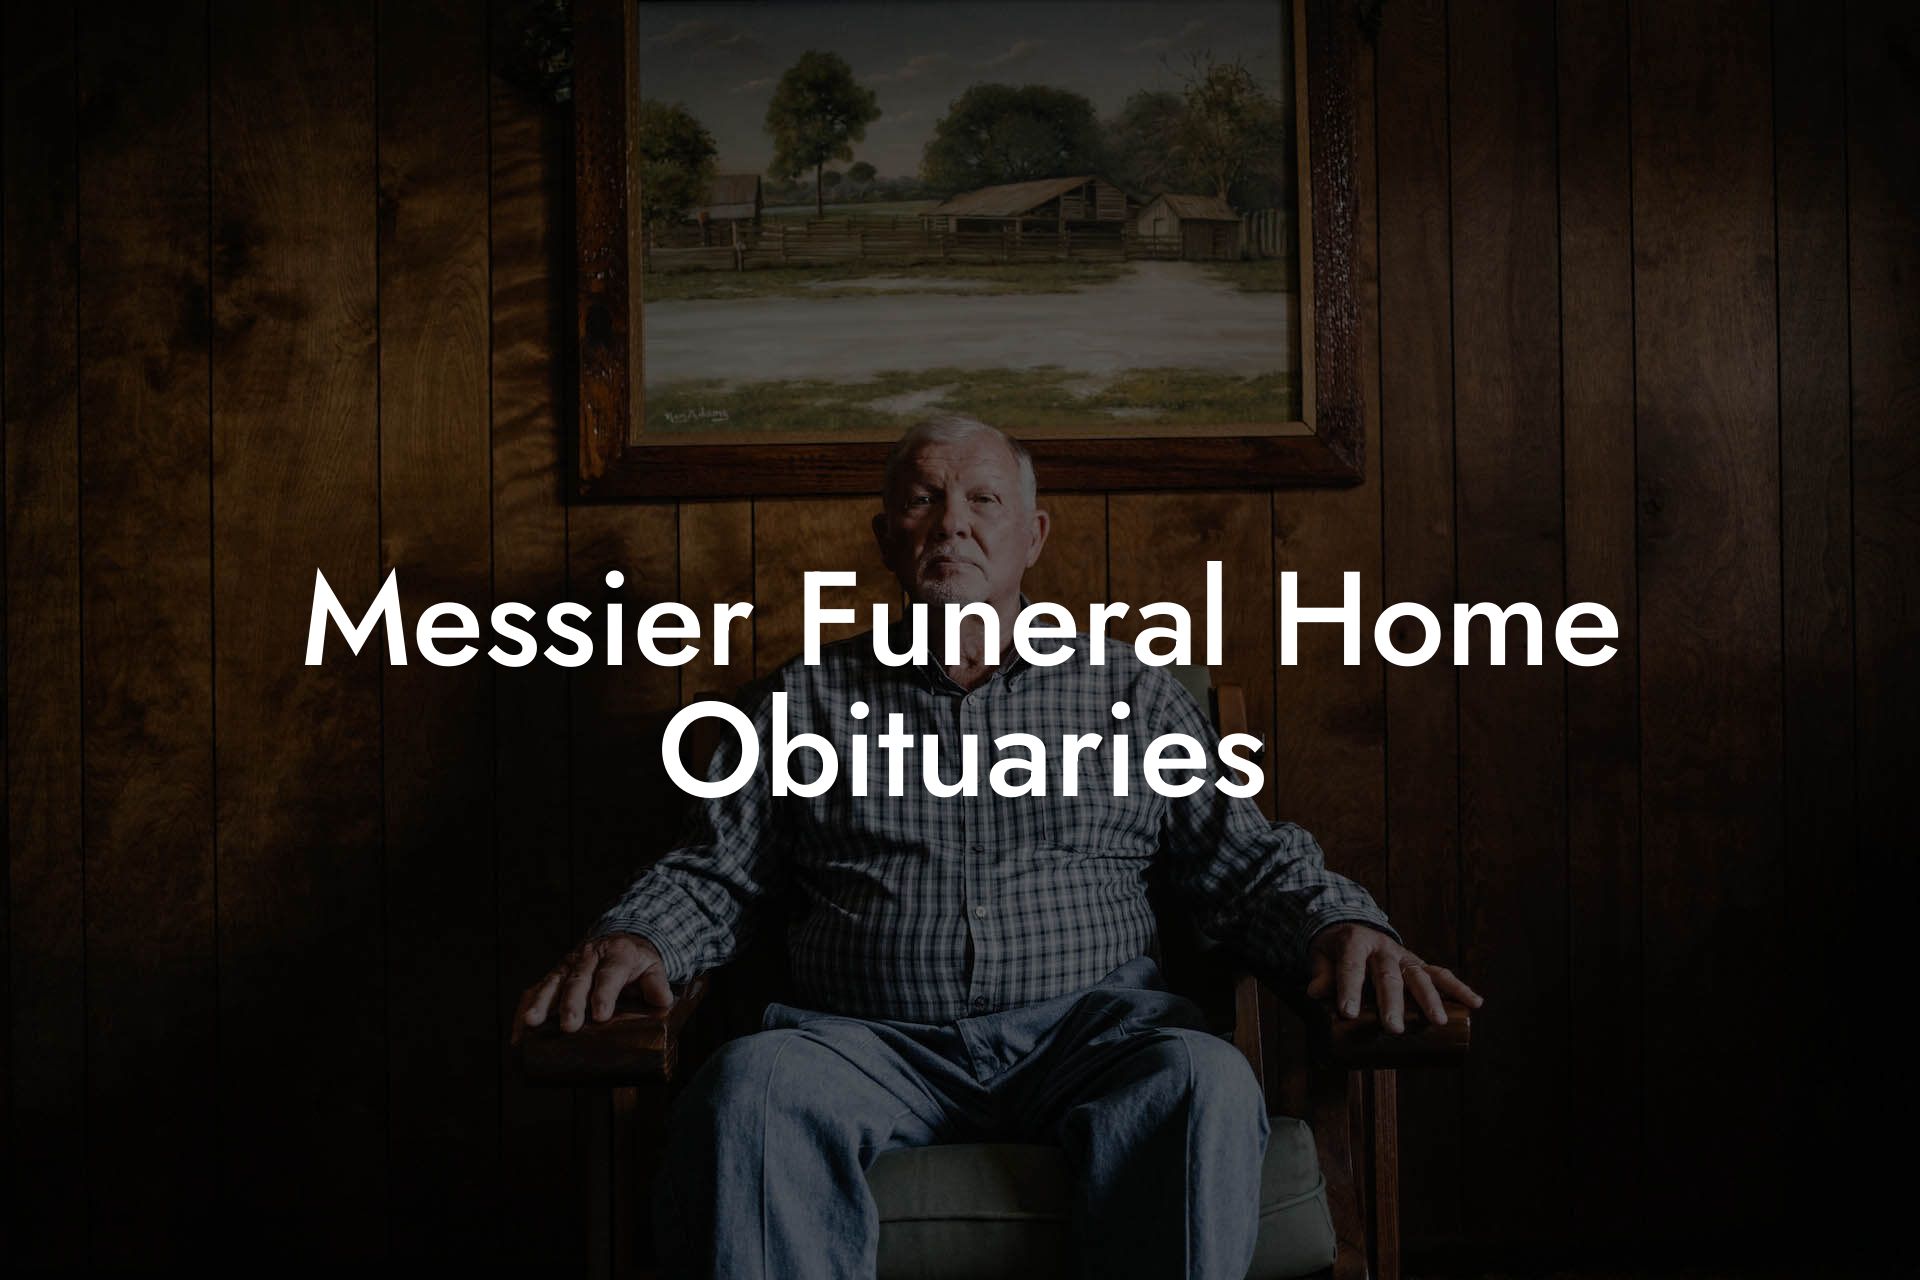 Messier Funeral Home Obituaries